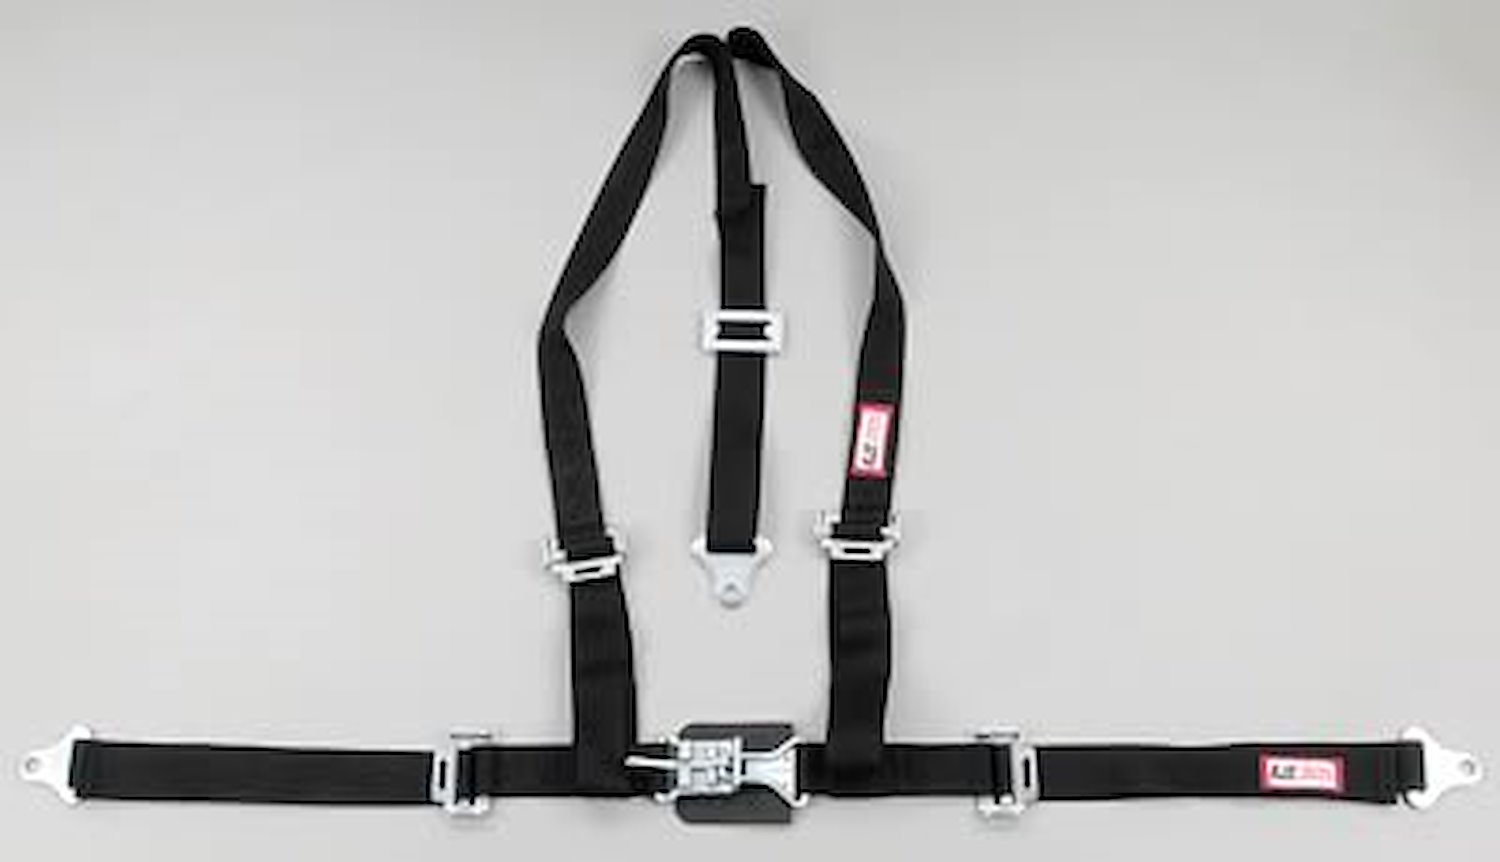 NON-SFI L&L HARNESS 2 PULL DOWN Lap Belt SNAP SEWN IN 2 S.H. Y FLOOR Mount WRAP/SNAP BLACK